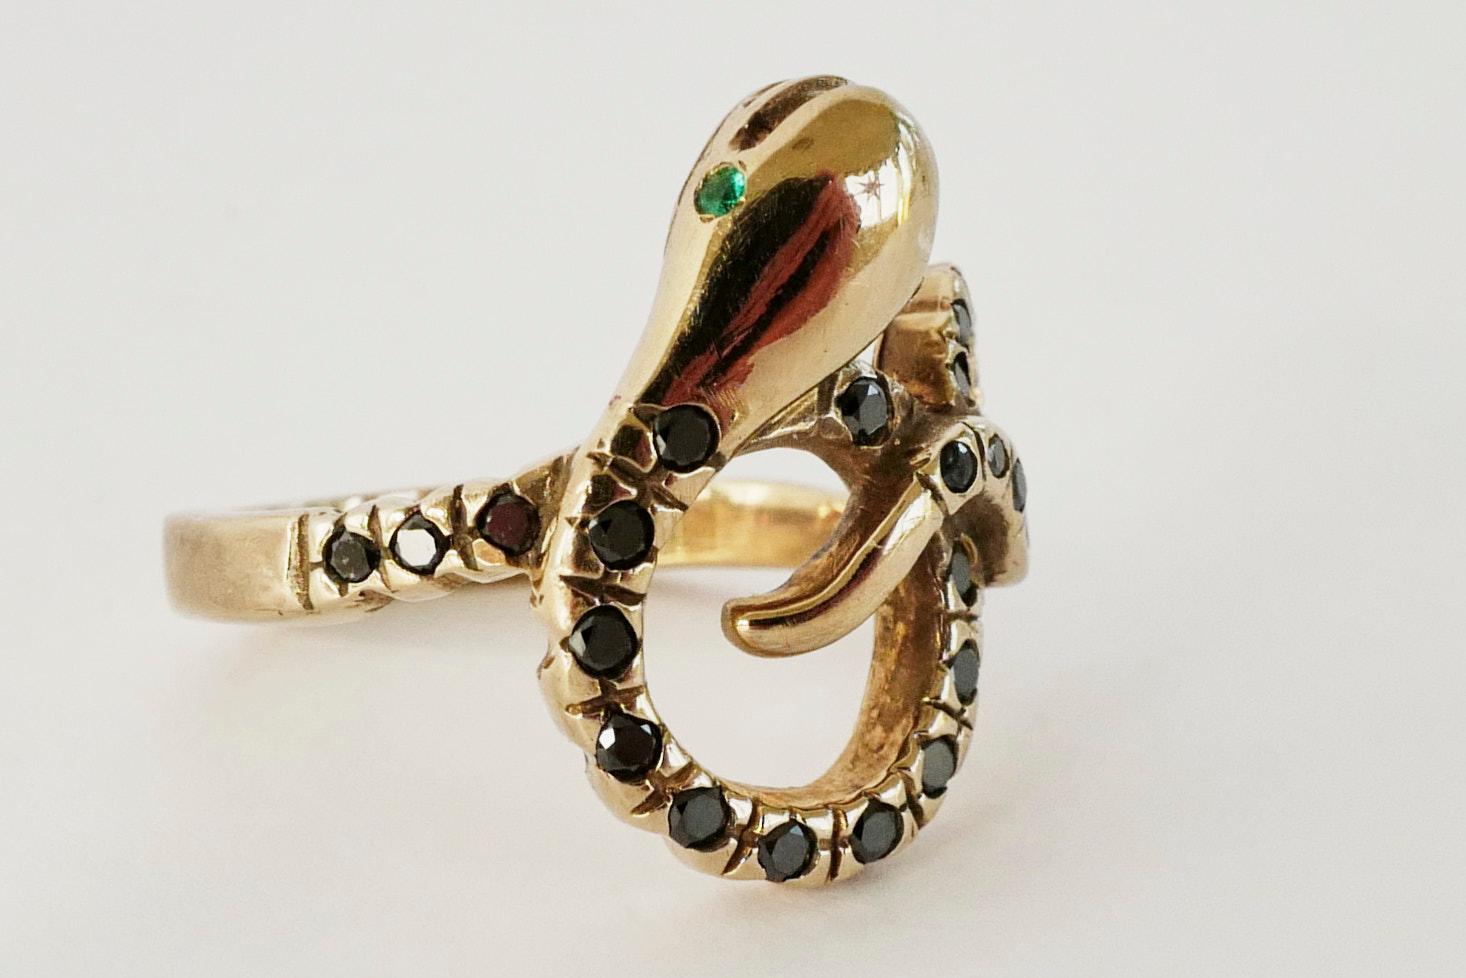 gold snake ring with emerald eyes